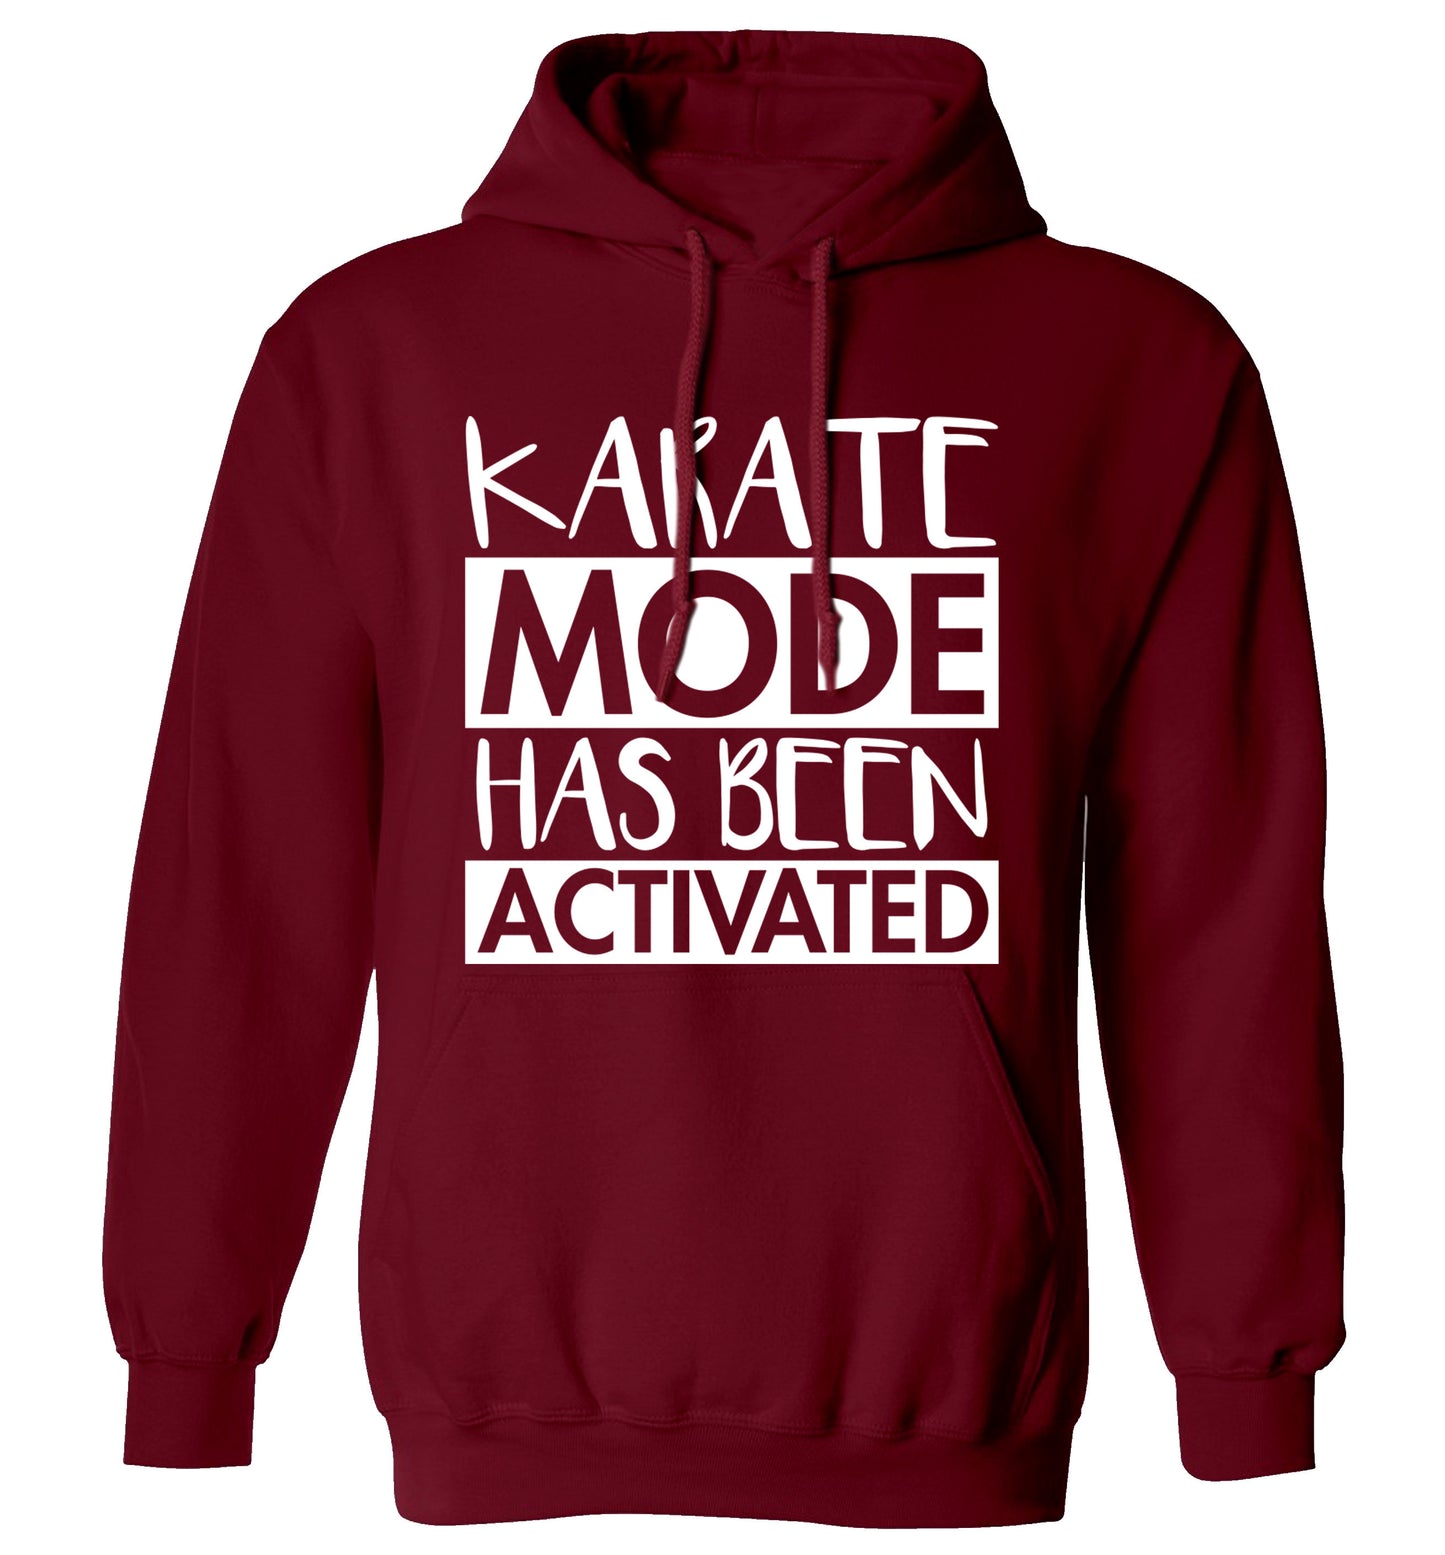 Karate mode activated adults unisex maroon hoodie 2XL